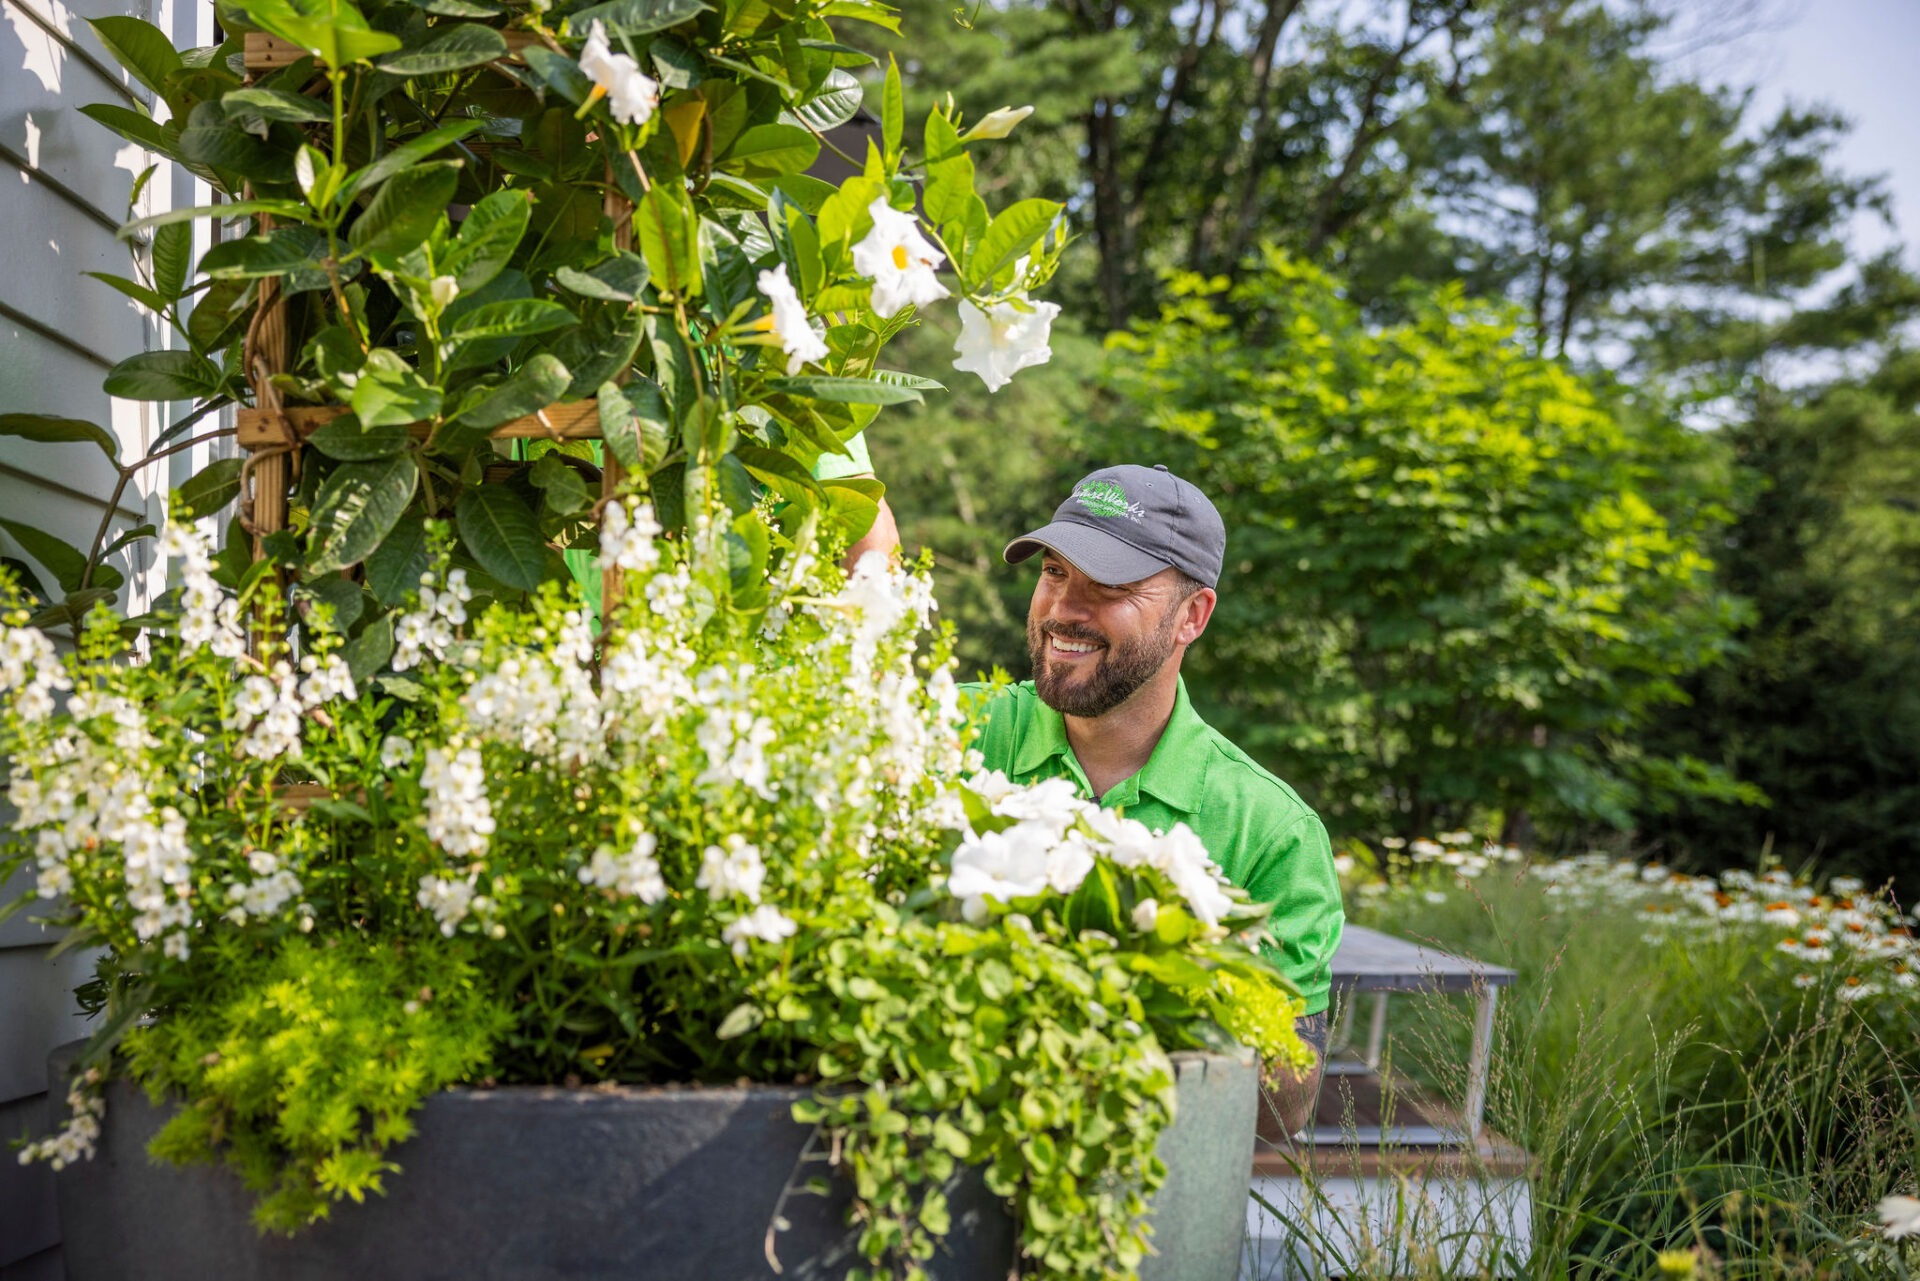 A person in a green shirt and cap cheerfully tends to a lush garden with vibrant white flowers, surrounded by greenery and sunlight.